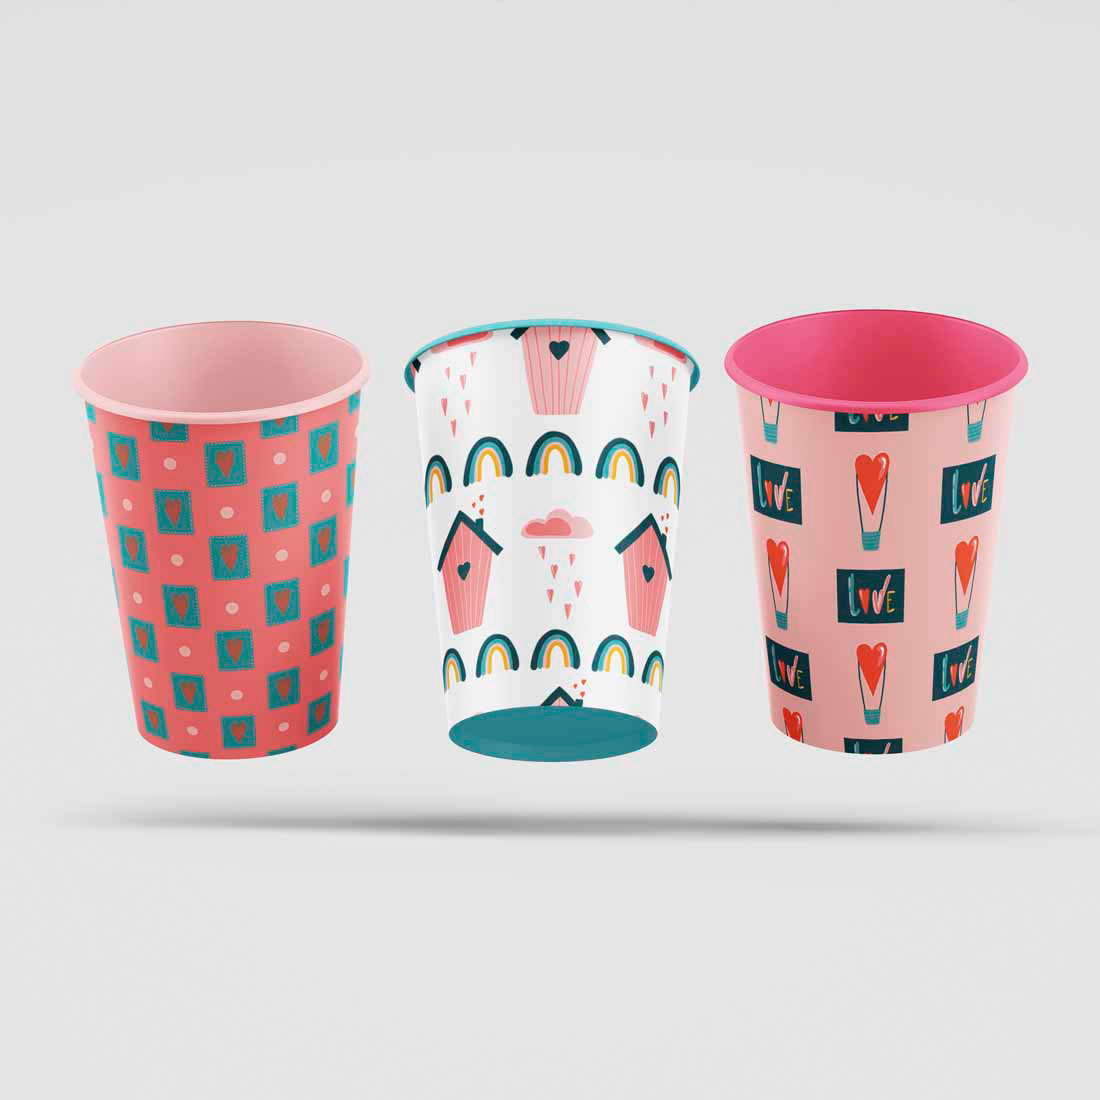 Image of cups with gorgeous patterns on the theme of Valentines Day.